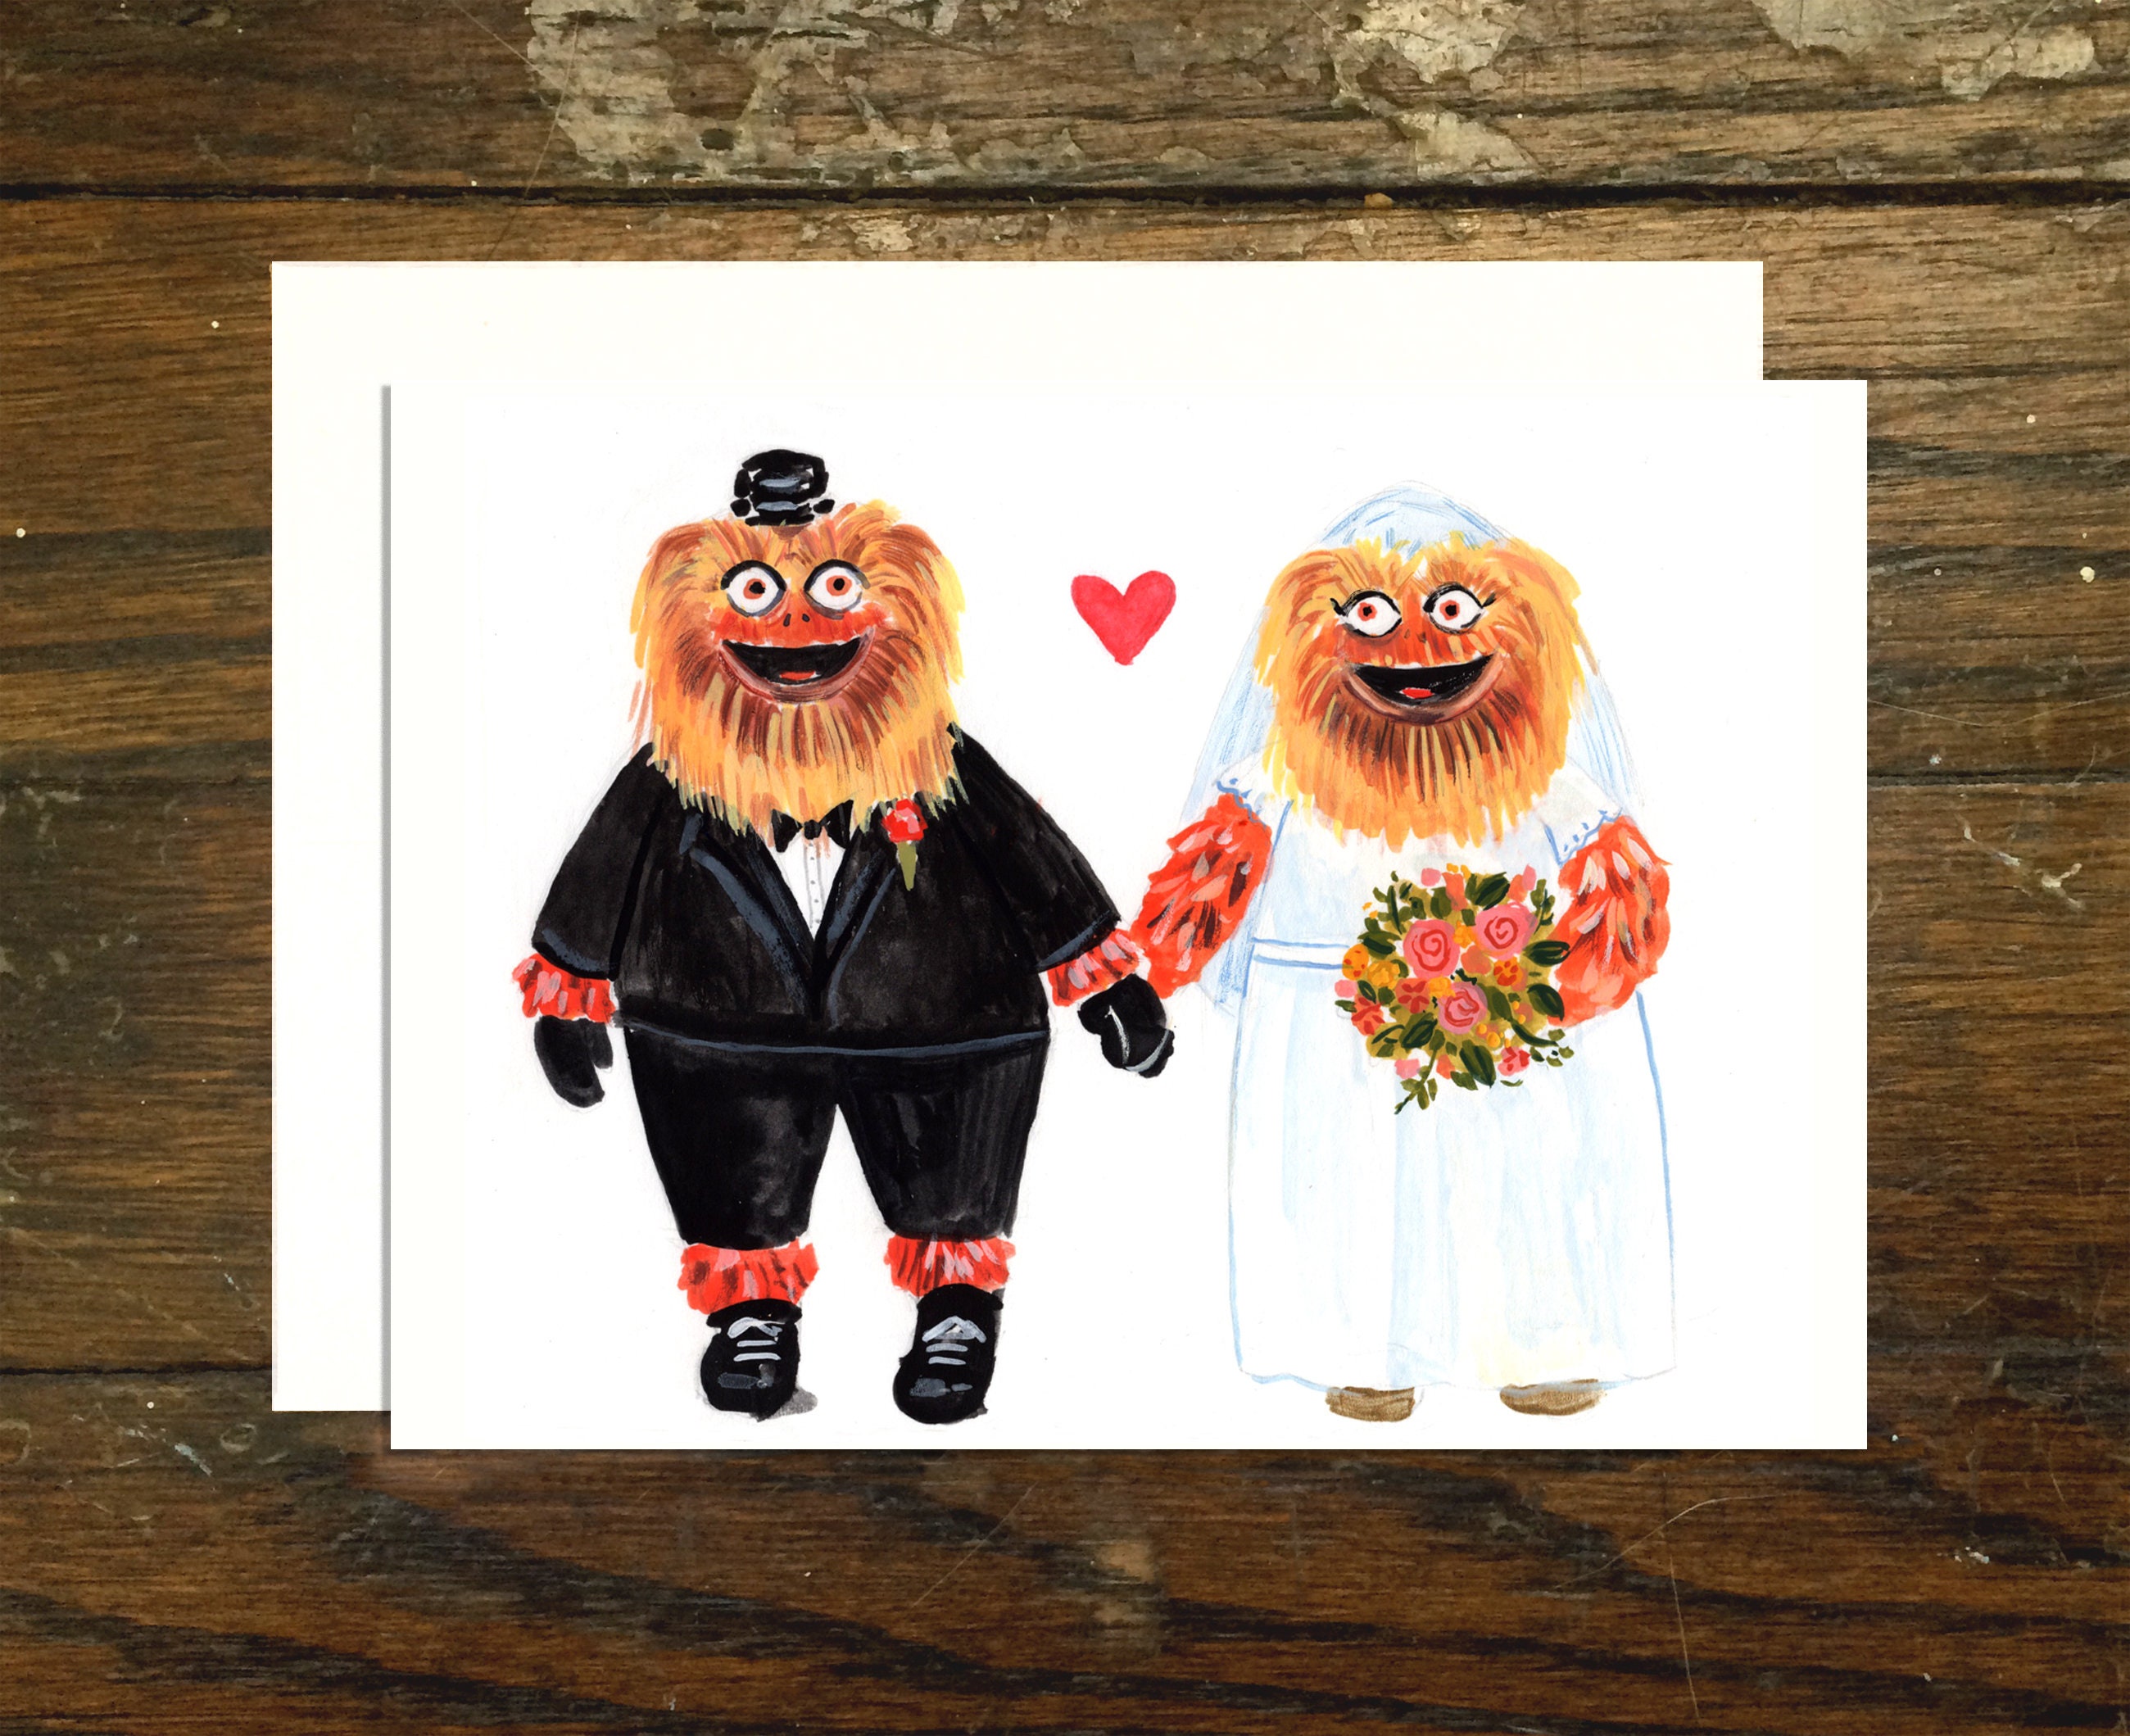 11 Gritty Gifts All Philadelphia Flyers Fans Deserve to Have